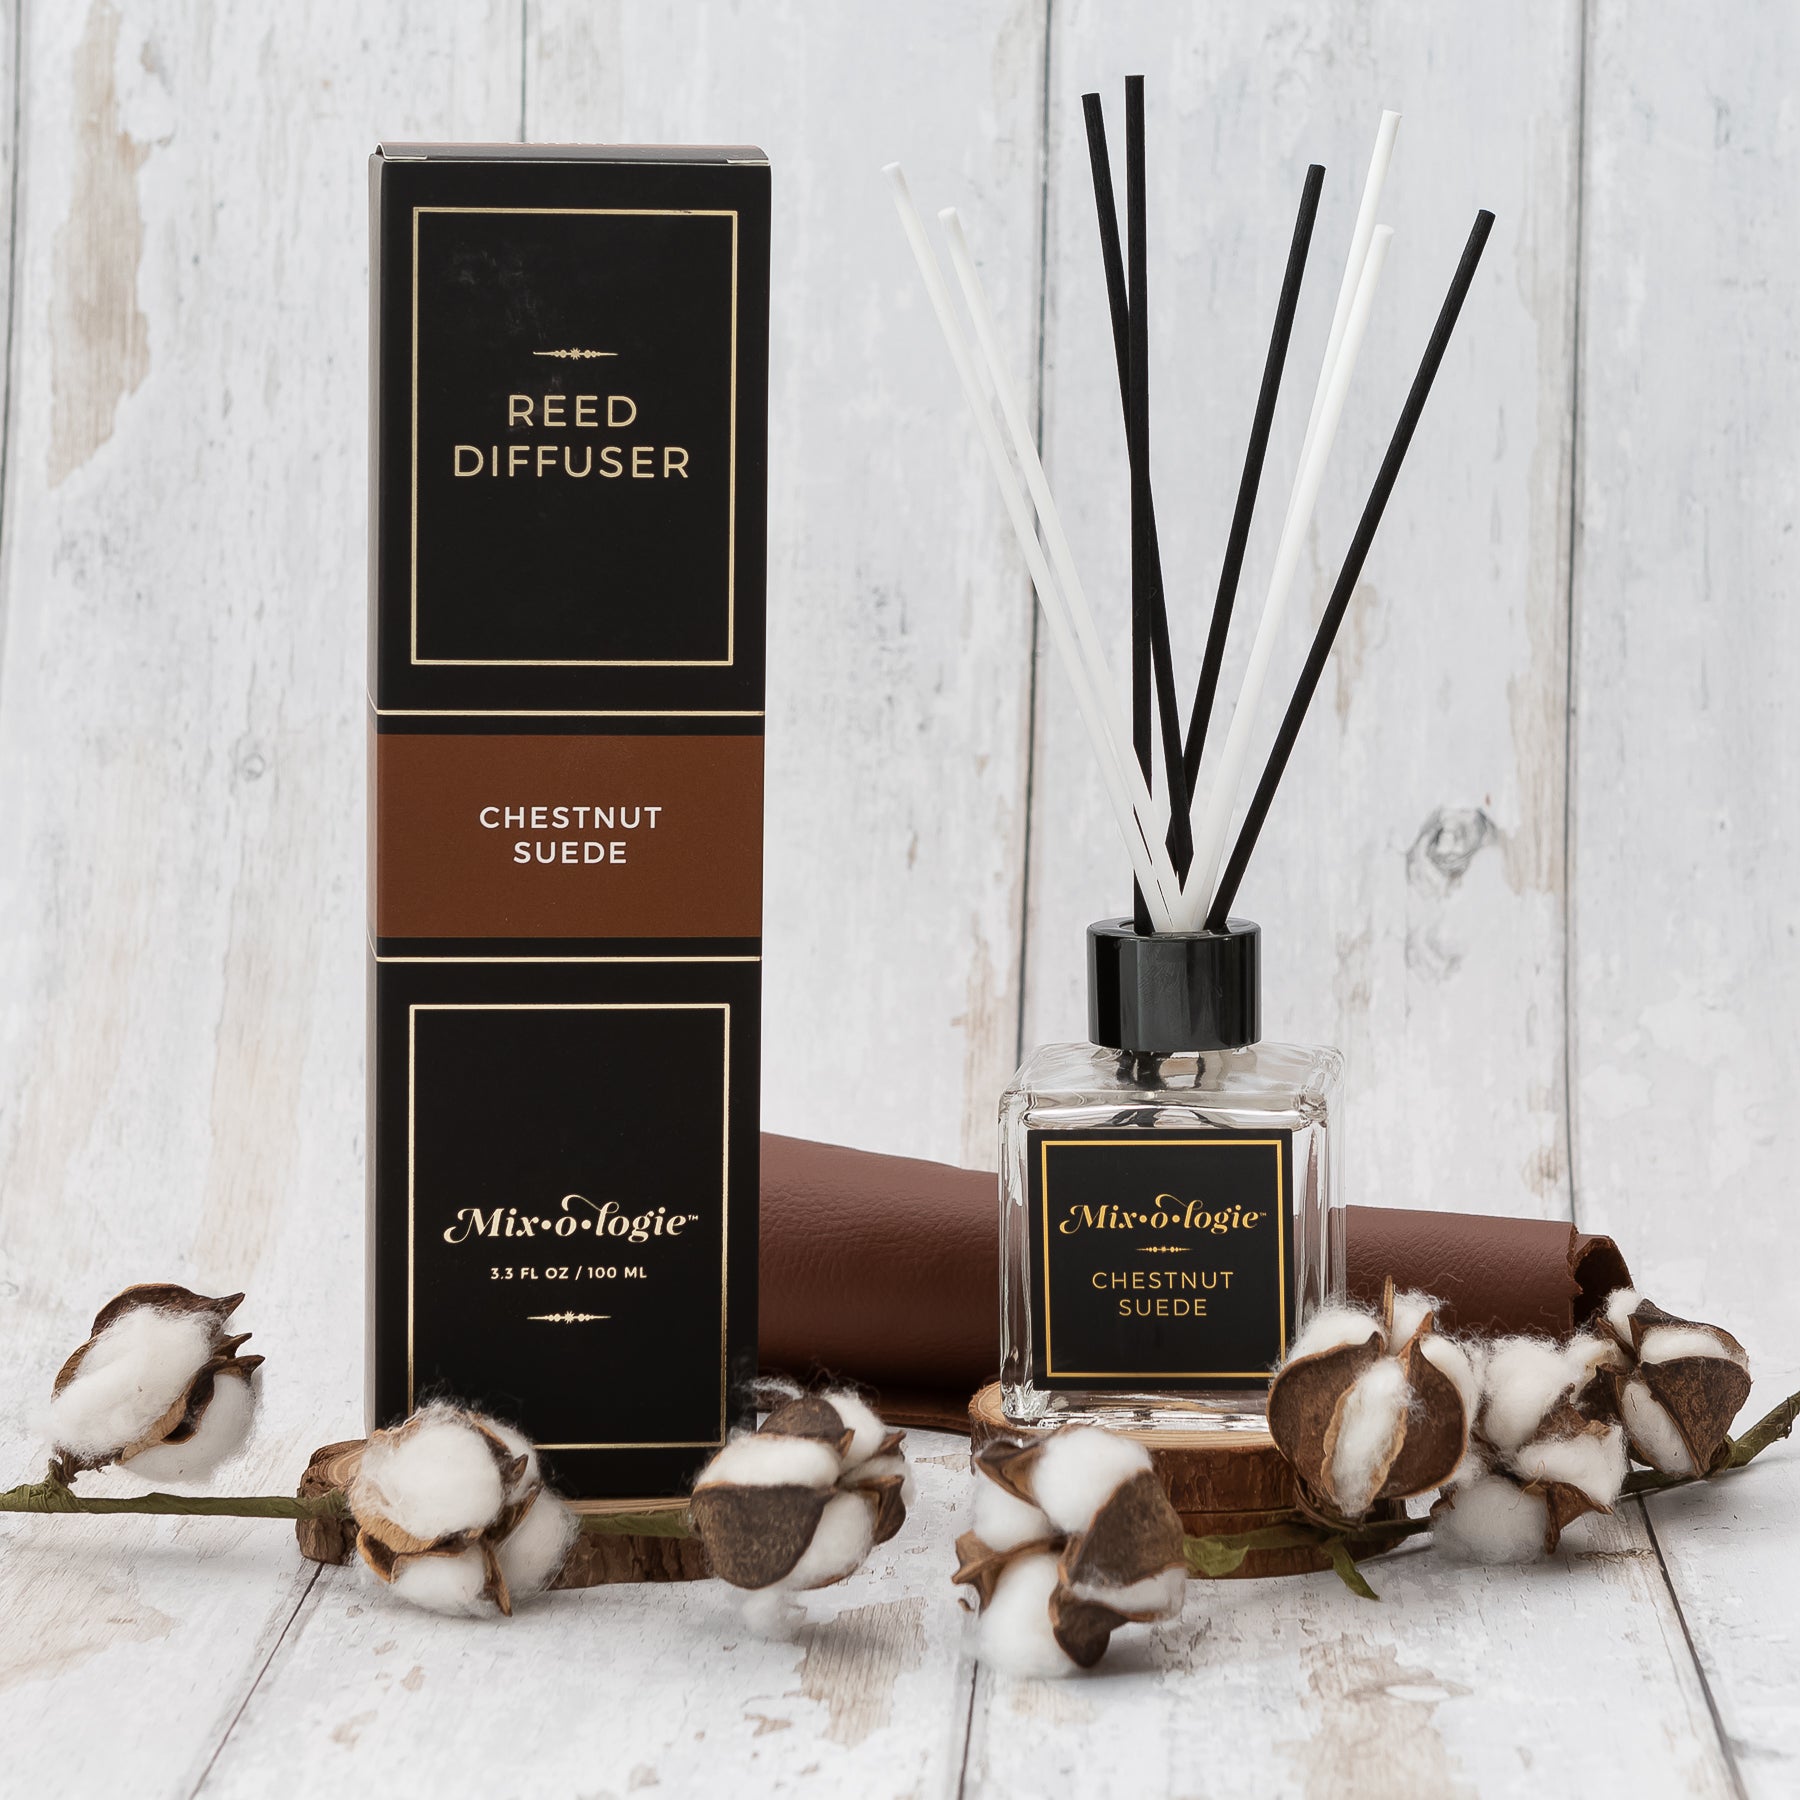 Chestnut Suede Reed Diffuser is a clear square glass container with black label that says Mixologie – Chestnut Suede. Has a black top and 4 white & 4 black reed sticks coming out of top, is 3.3 fl oz or 100 mL of clear scented liquid. Black rectangle package box with brown label. Box and diffuser are pictured with white wood and cotton. 